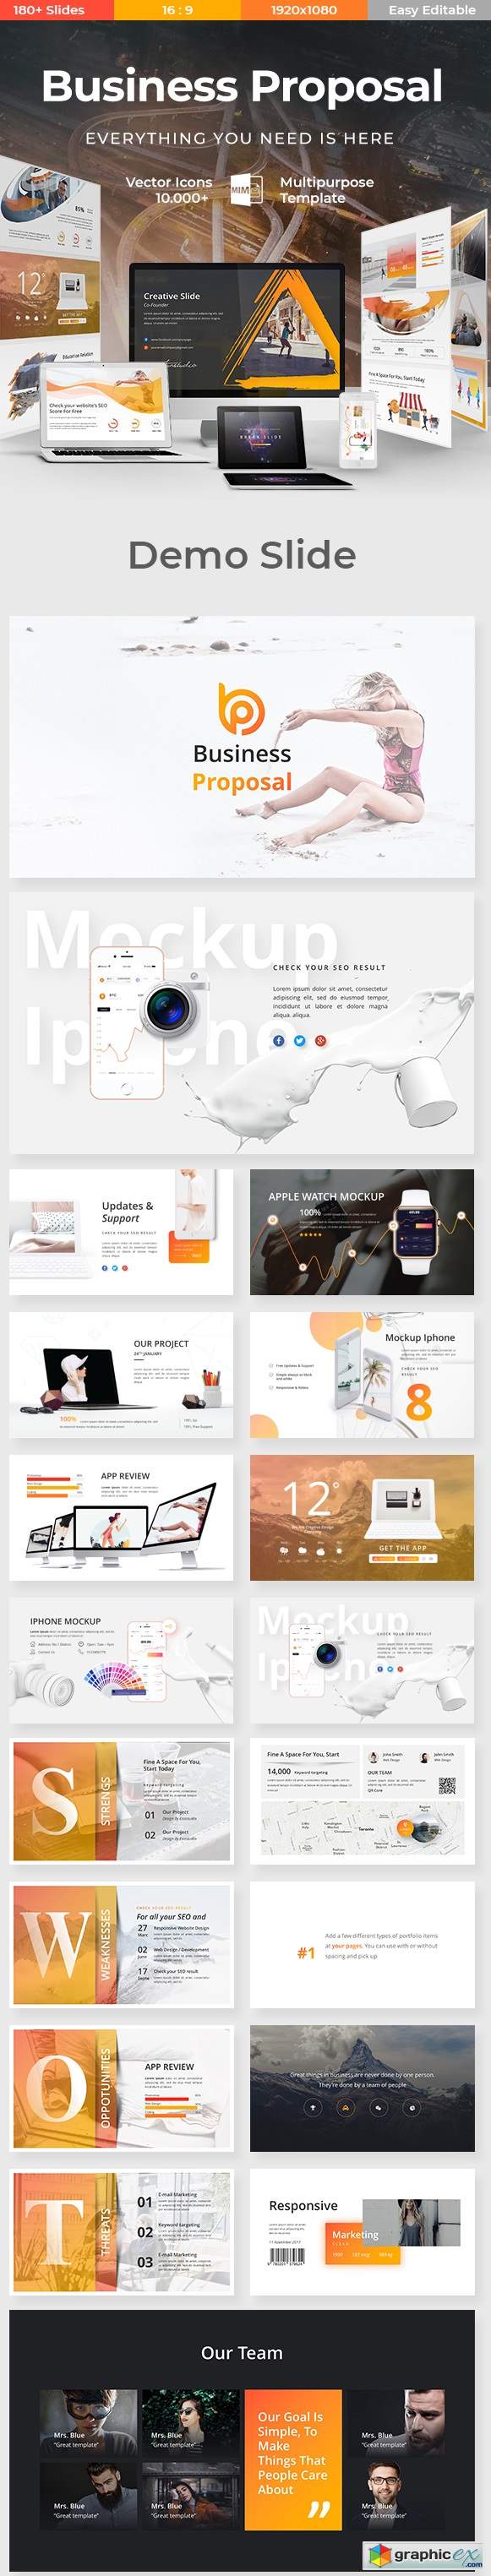 Business Proposal Powerpoint Template 22604356